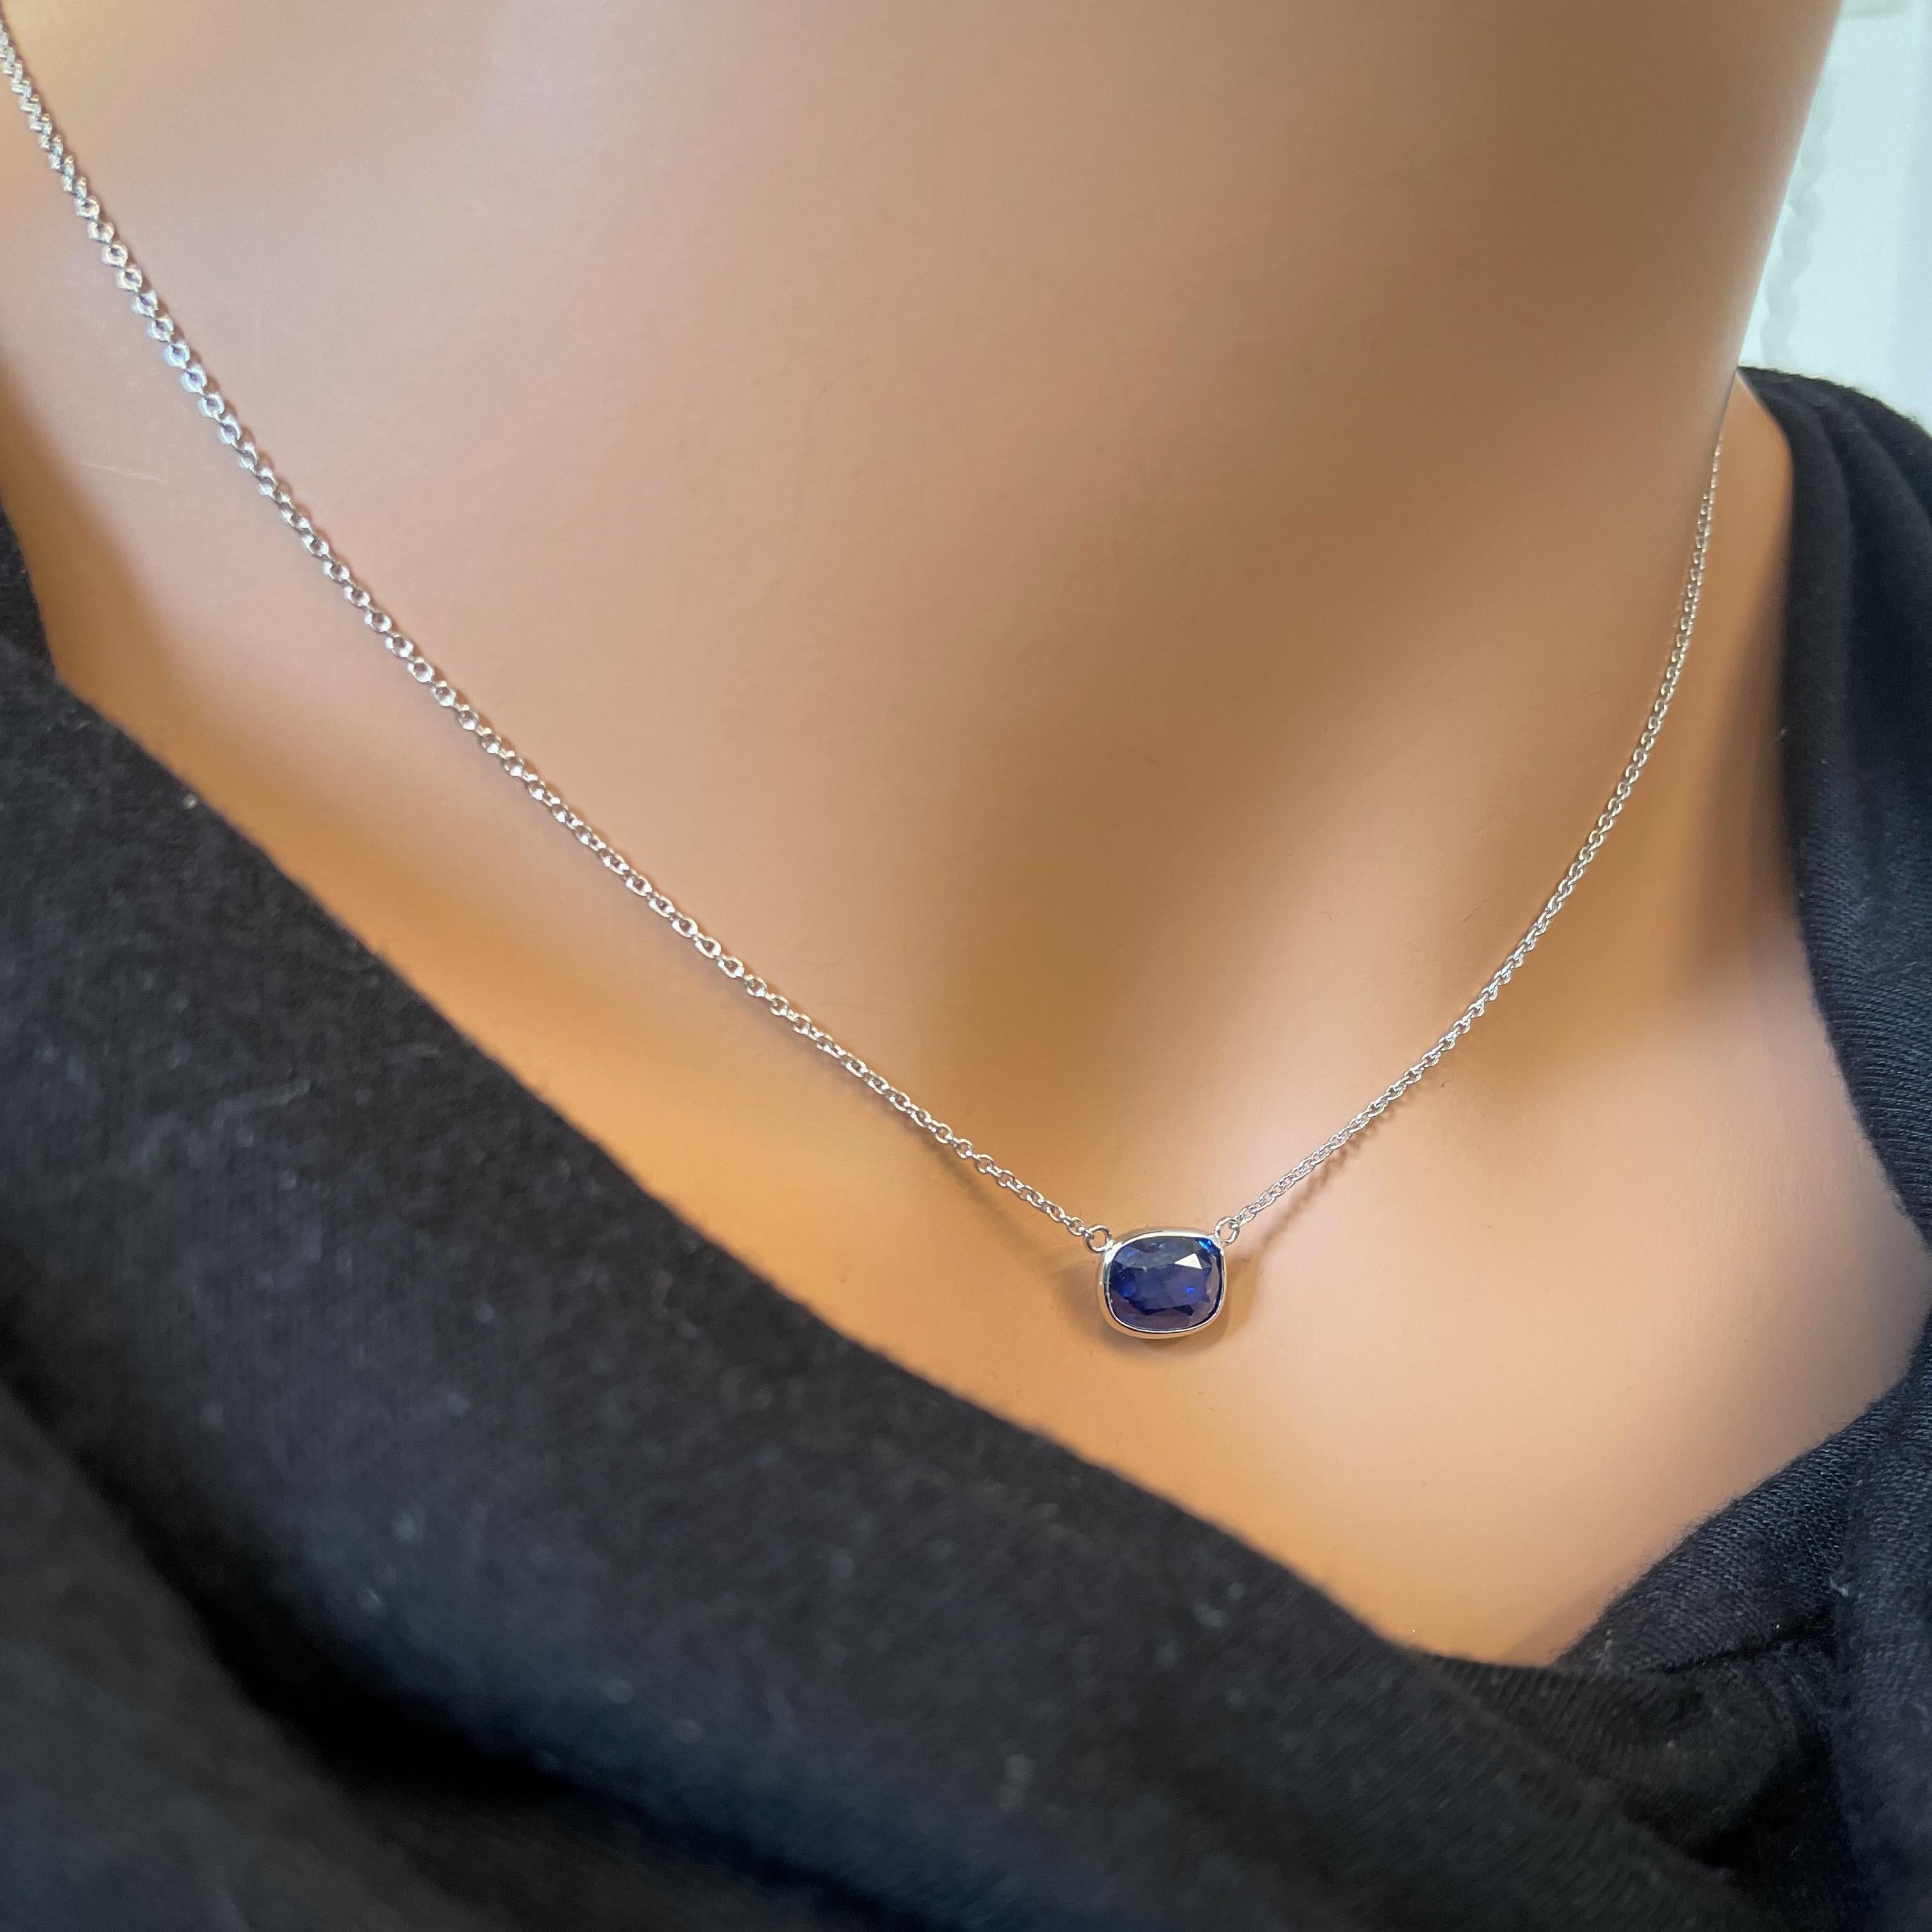 Contemporary 2.64 Carat Cushion Blue Sapphire Fashion Necklaces In 14K White Gold  For Sale